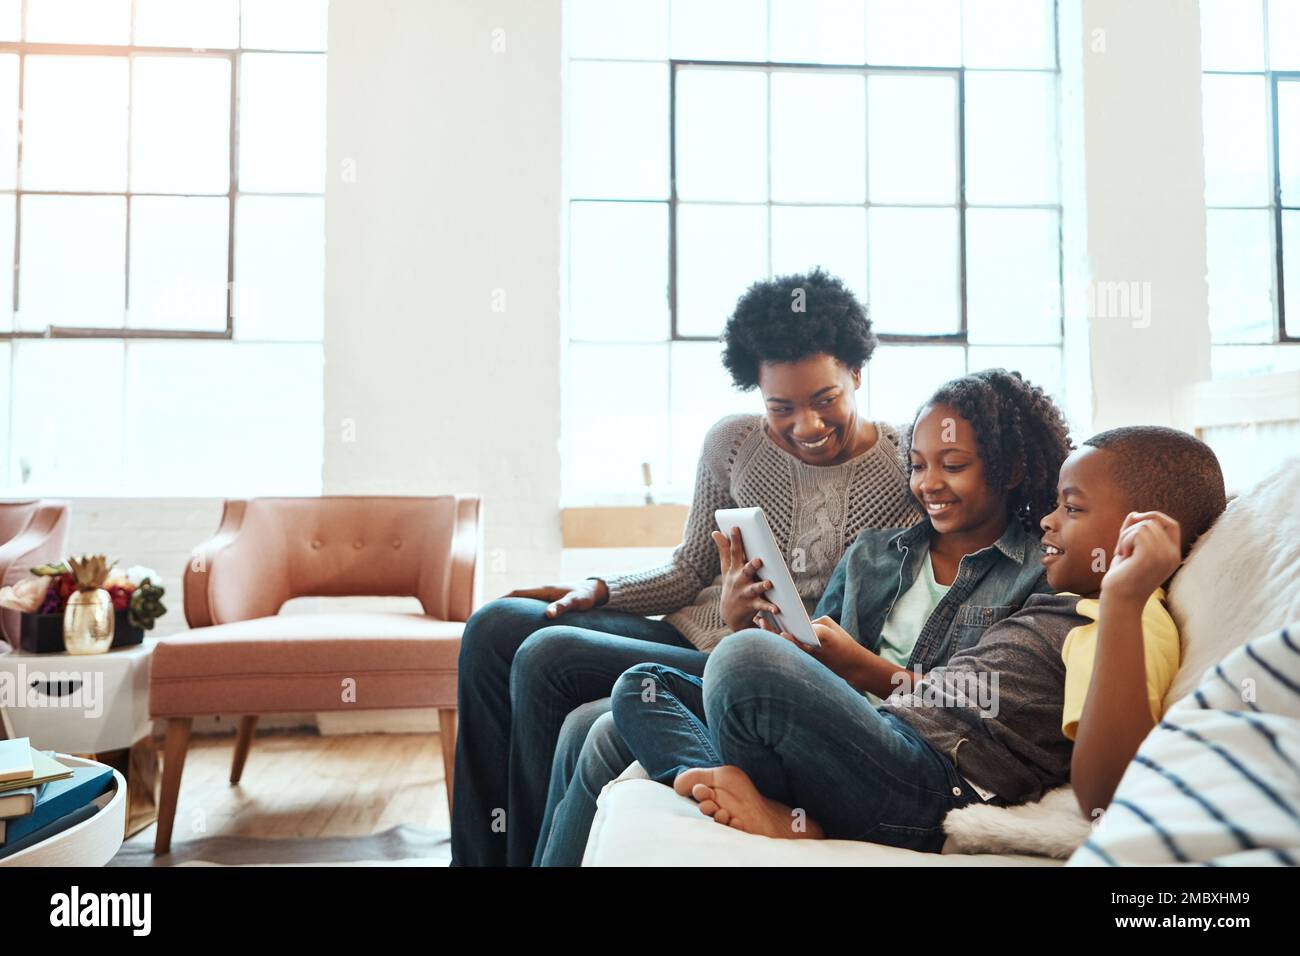 Family with tablet, watch and relax at family home together, spending quality time together with technology. Black people, mother and children on sofa Stock Photo